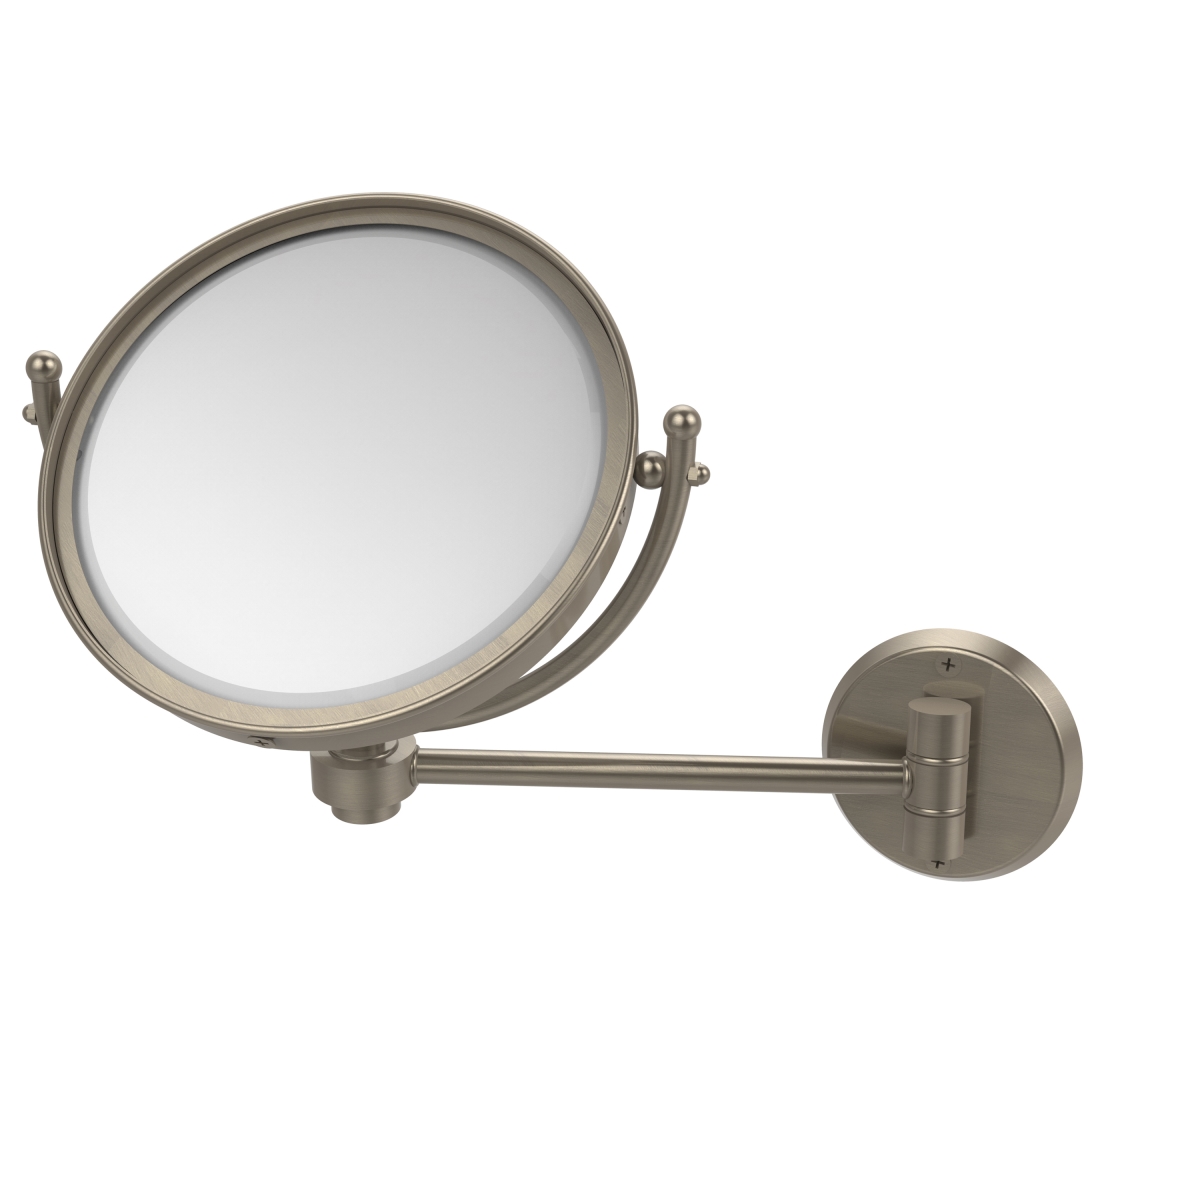 WM-5-2X-PEW 8 in. Wall Mounted Make-Up Mirror 2X Magnification, Antique Pewter - 10 x 8 x 11 in -  Allied Brass, WM-5/2X-PEW